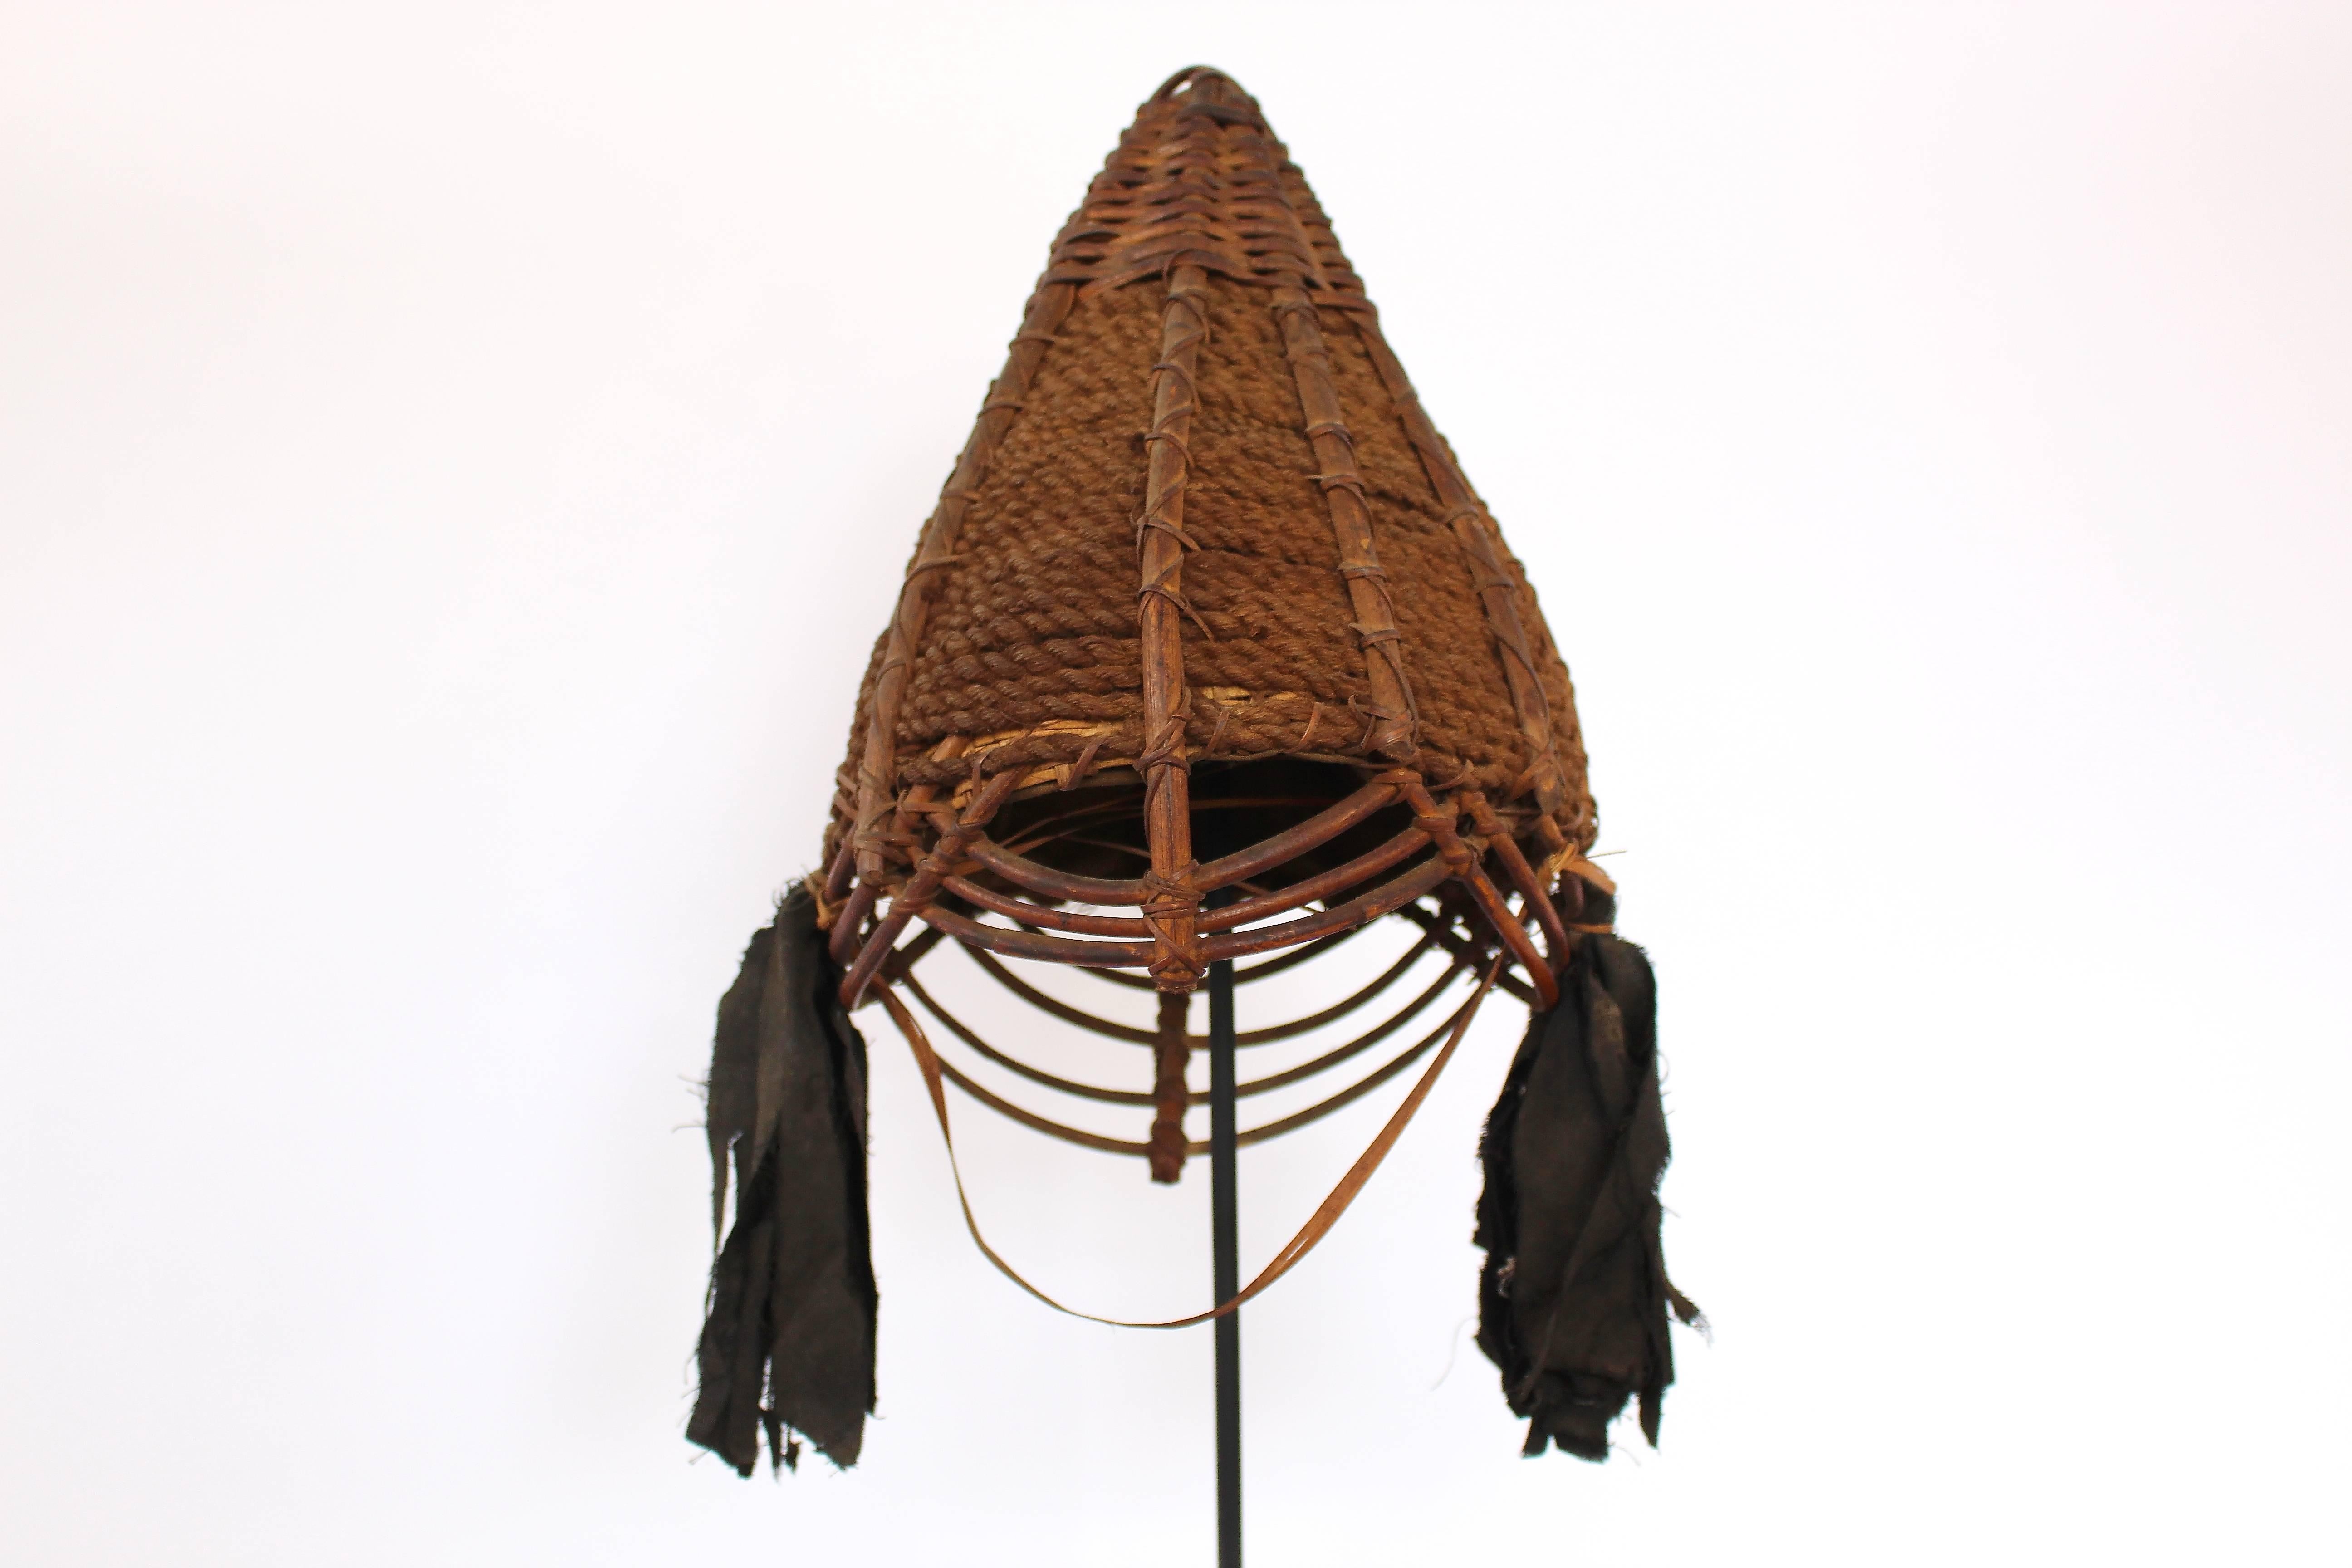 These hats feature wide, open weaving below the brim. Though more decorative than protective, two of them also have cloth tassels on either side.

Like the monumental ornamentation seen on the facades of morungs and dwellings, an individual’s dress